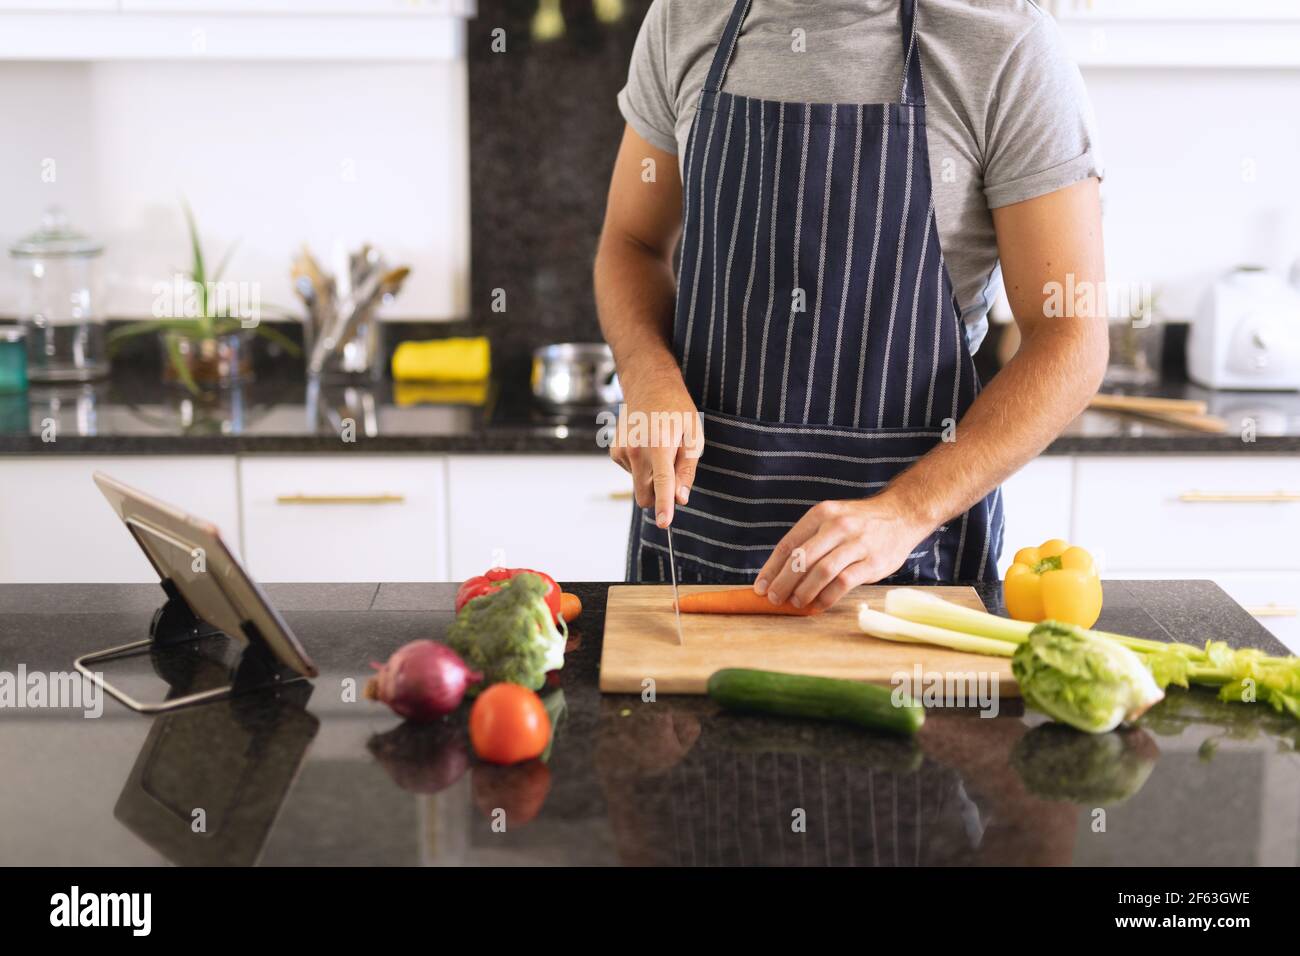 Man Wearing Apron and Cooking Stock Photo - Image of preparing, healthy:  31670526